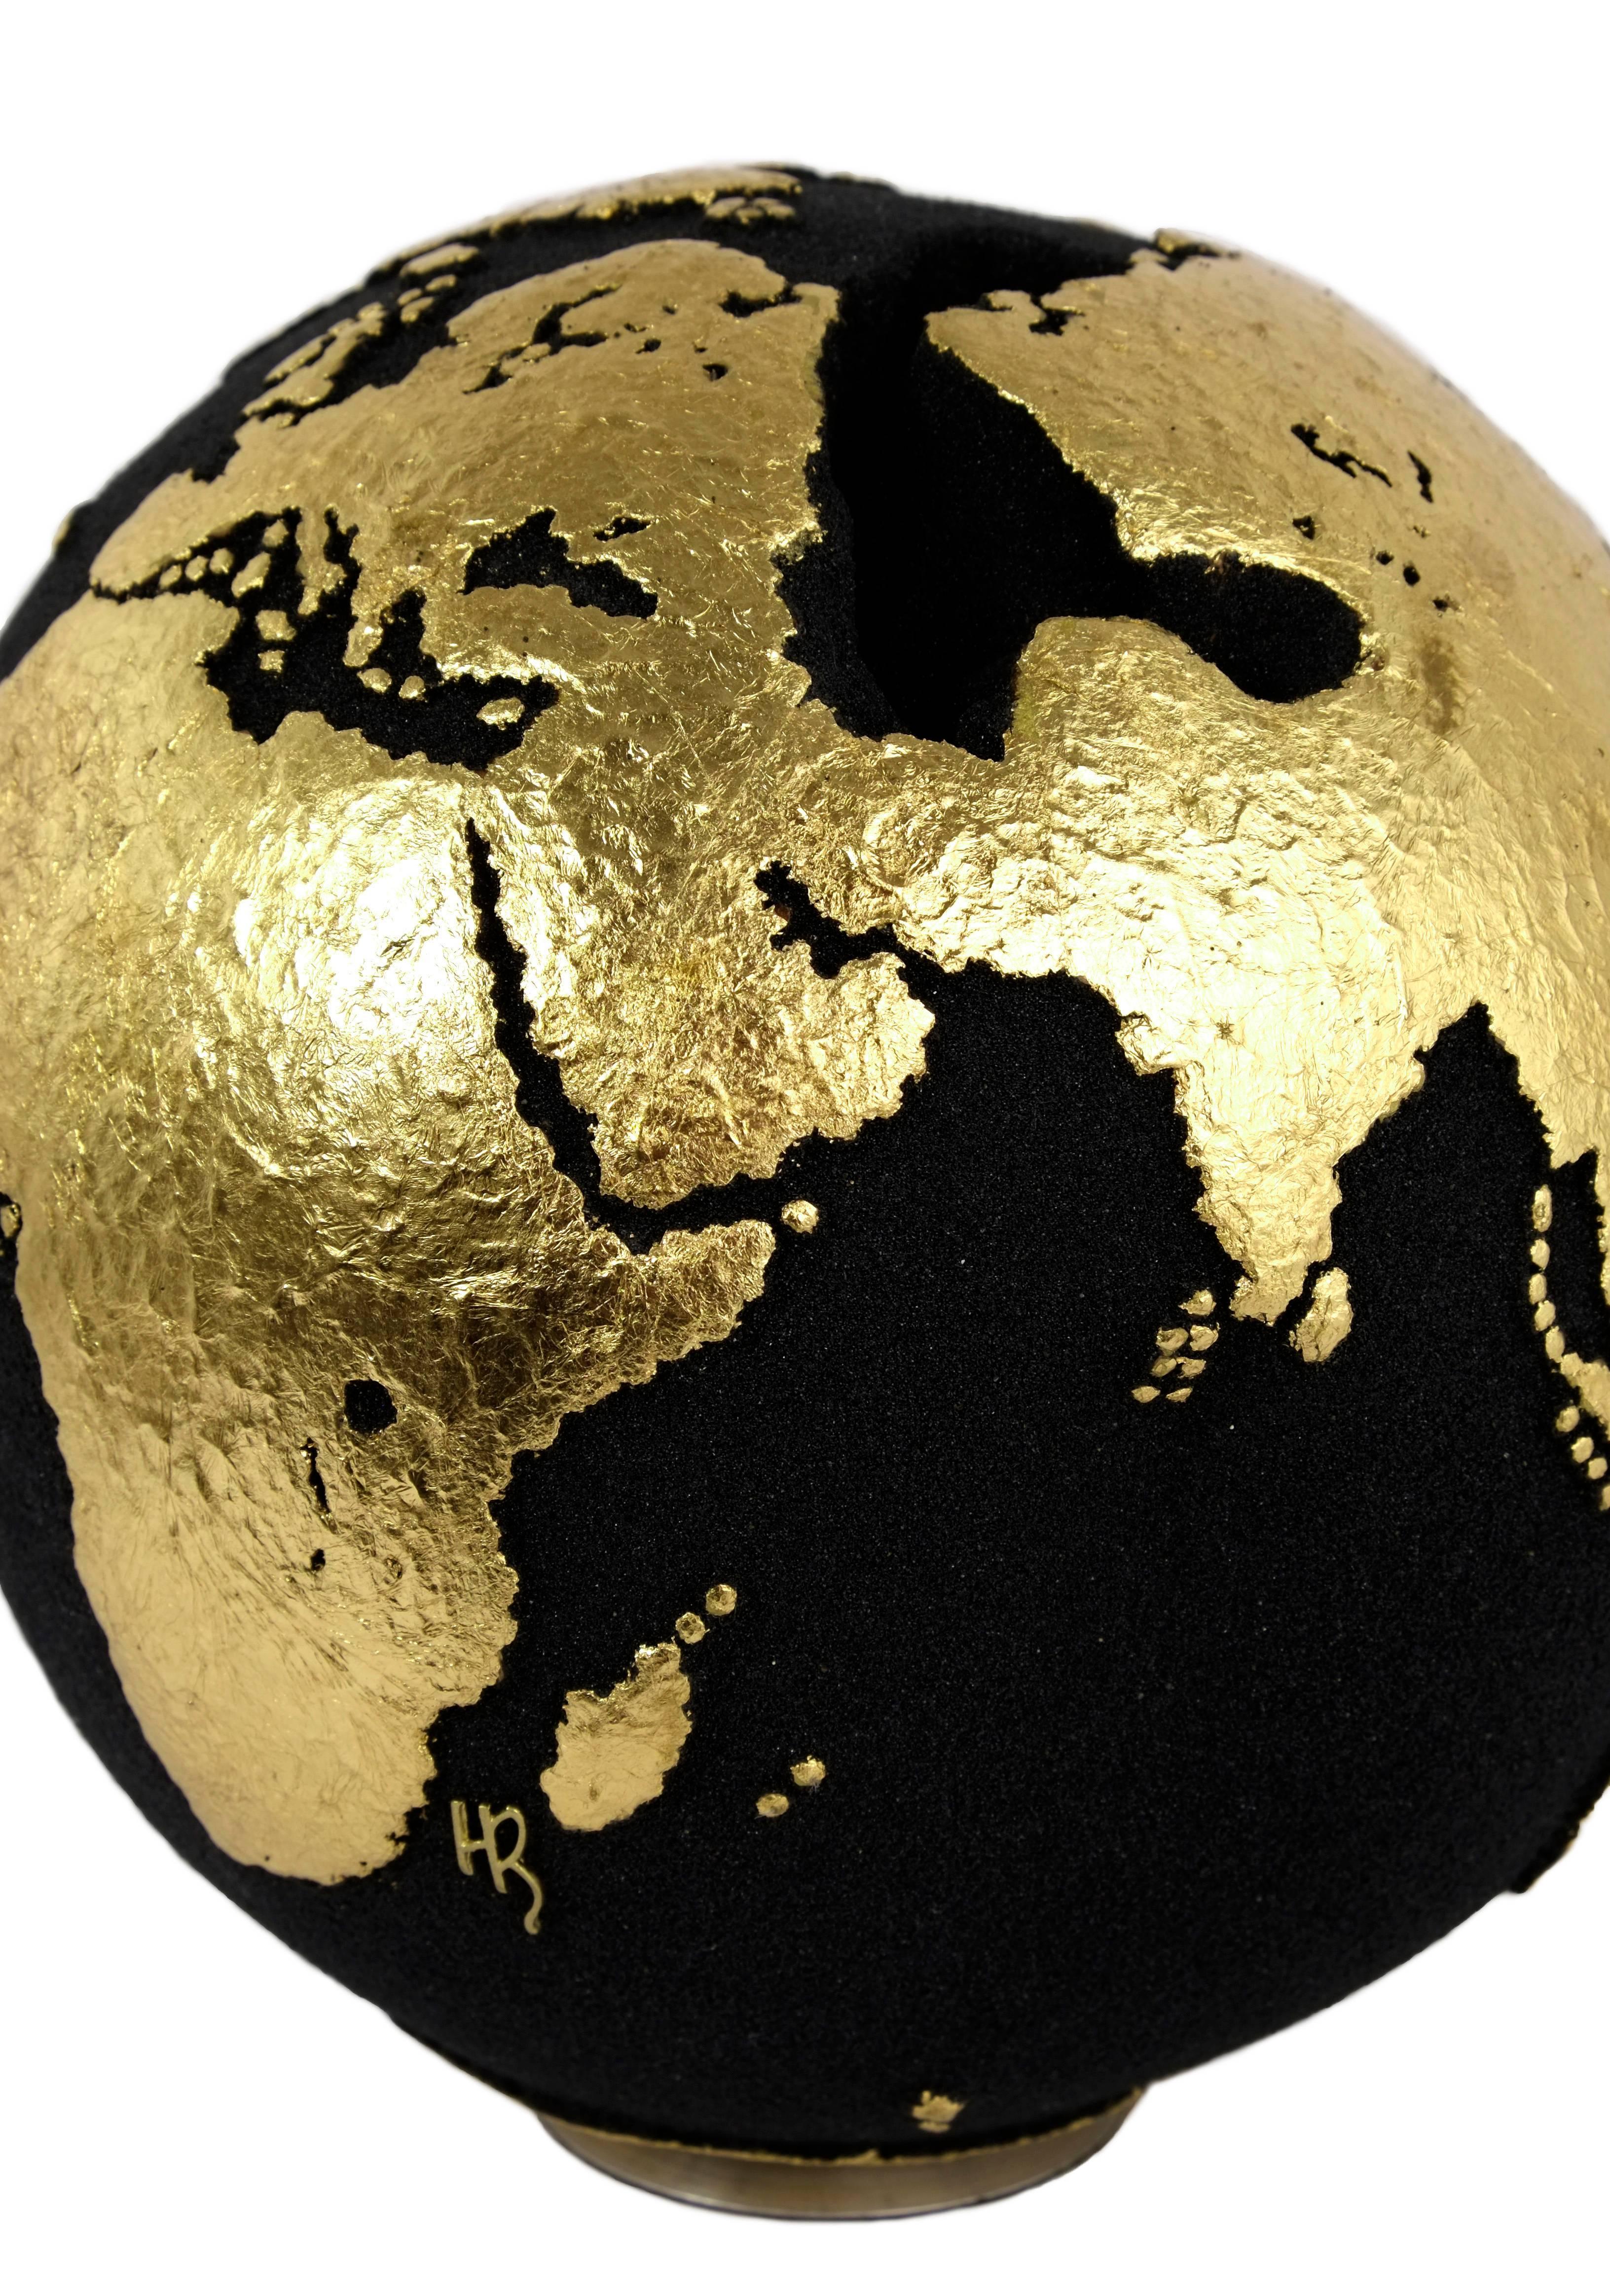 Balinese Classic Globe with Volcanic Sand and Gold Finishing, 20 cm